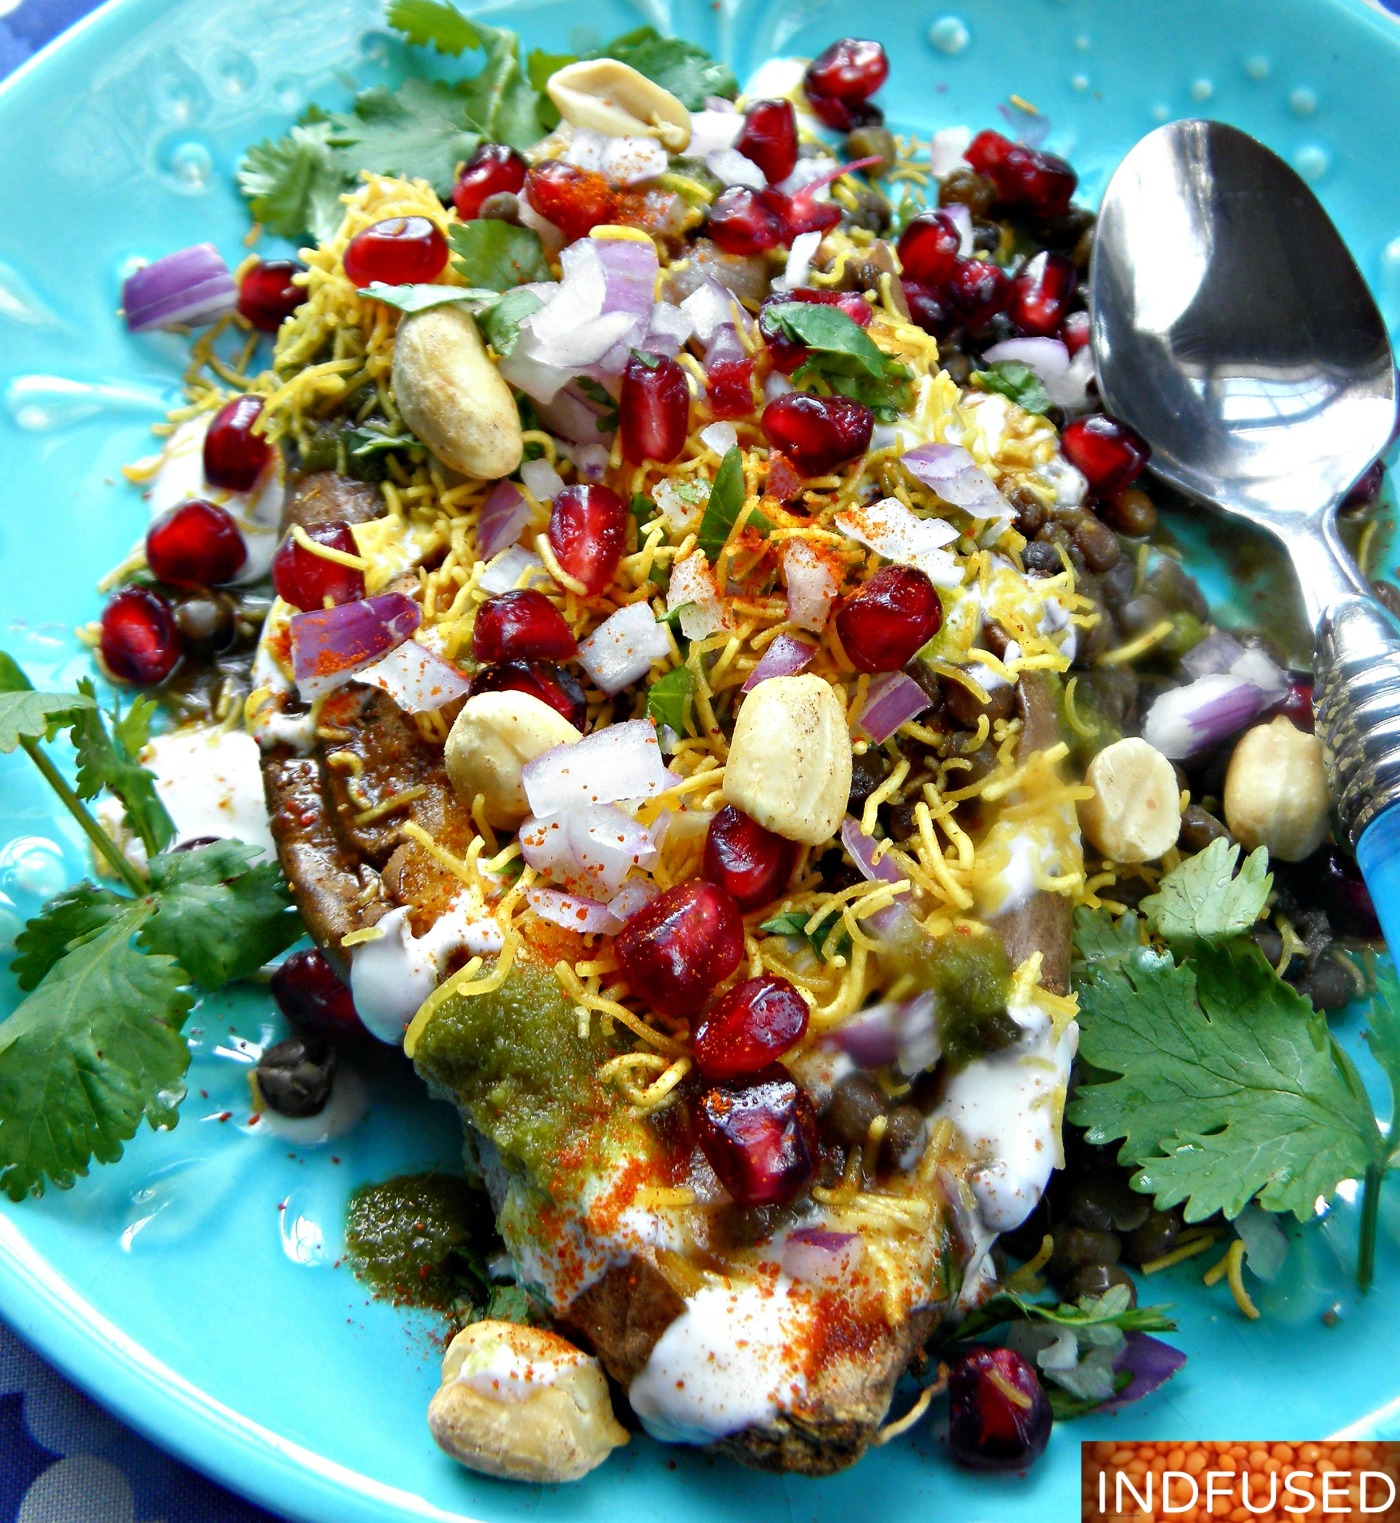 Gluten free, figure friendly, recipe for roasted sweet potatoes topped with mouthwatering Indian chaat spices and chutneys